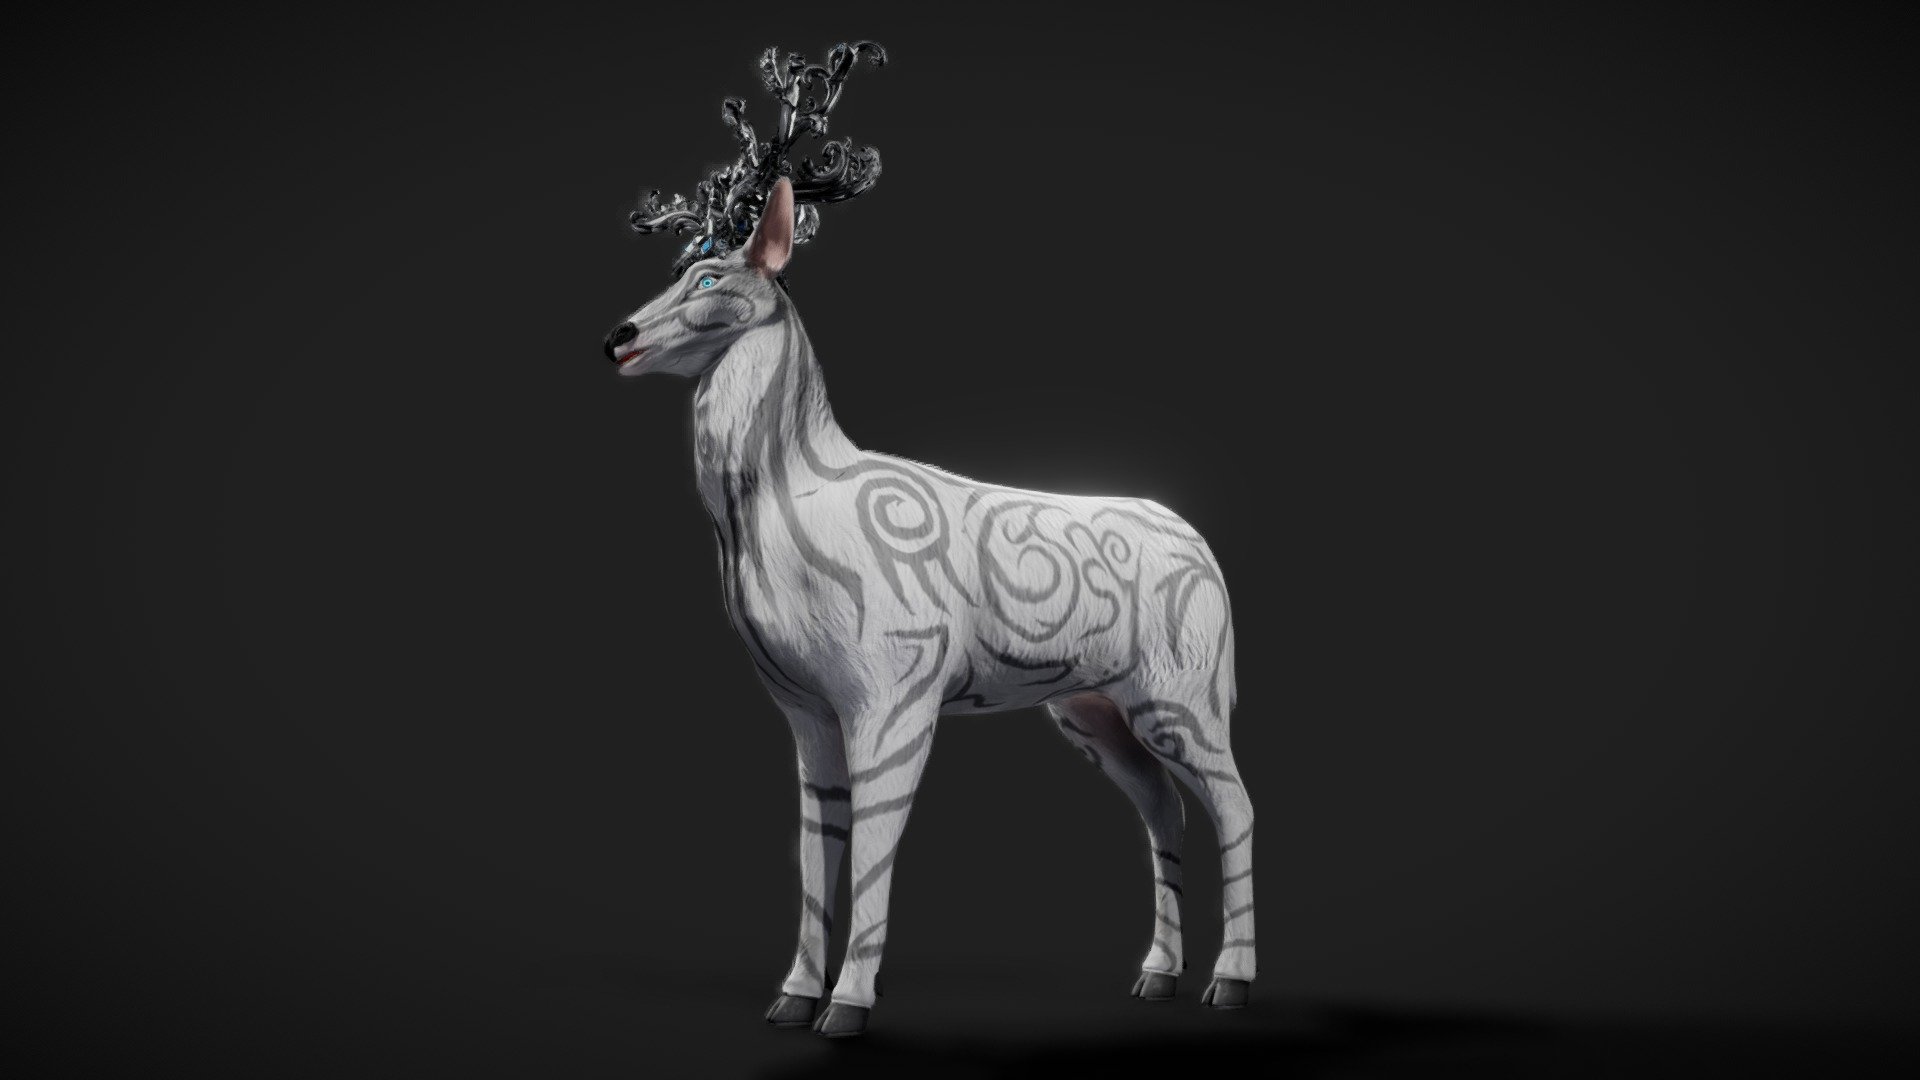 Fantasy Golden Deer A high-quality 3D fantasy deer model with 3 texture variations, a large set of animations and a detailed skeleton (just watch the video preview!). The model is already configured for Unity and Unreal Engine.

Included: Golden Deer mesh - 18619 verts

3 sets of textures: White Black White with black ornate

Animations:




Idle

Idle2

Attack1

Attack2

Death1

Death2

Eat

Sleep

Fall

GetDamage1

GetDamage2

Walk

WalkRight

WalkLeft

Run

RunAttack

SwimIdle

SwimForward

Each texture set includes: Base color, Roughness, Metallic, Normal map 4096x4096 resolution The model uses 4 materials, skin, eye, eye glass, eyelashes. This way you can adjust the eye color and adjust the glare/distortion of the eyes in any engines 3d model